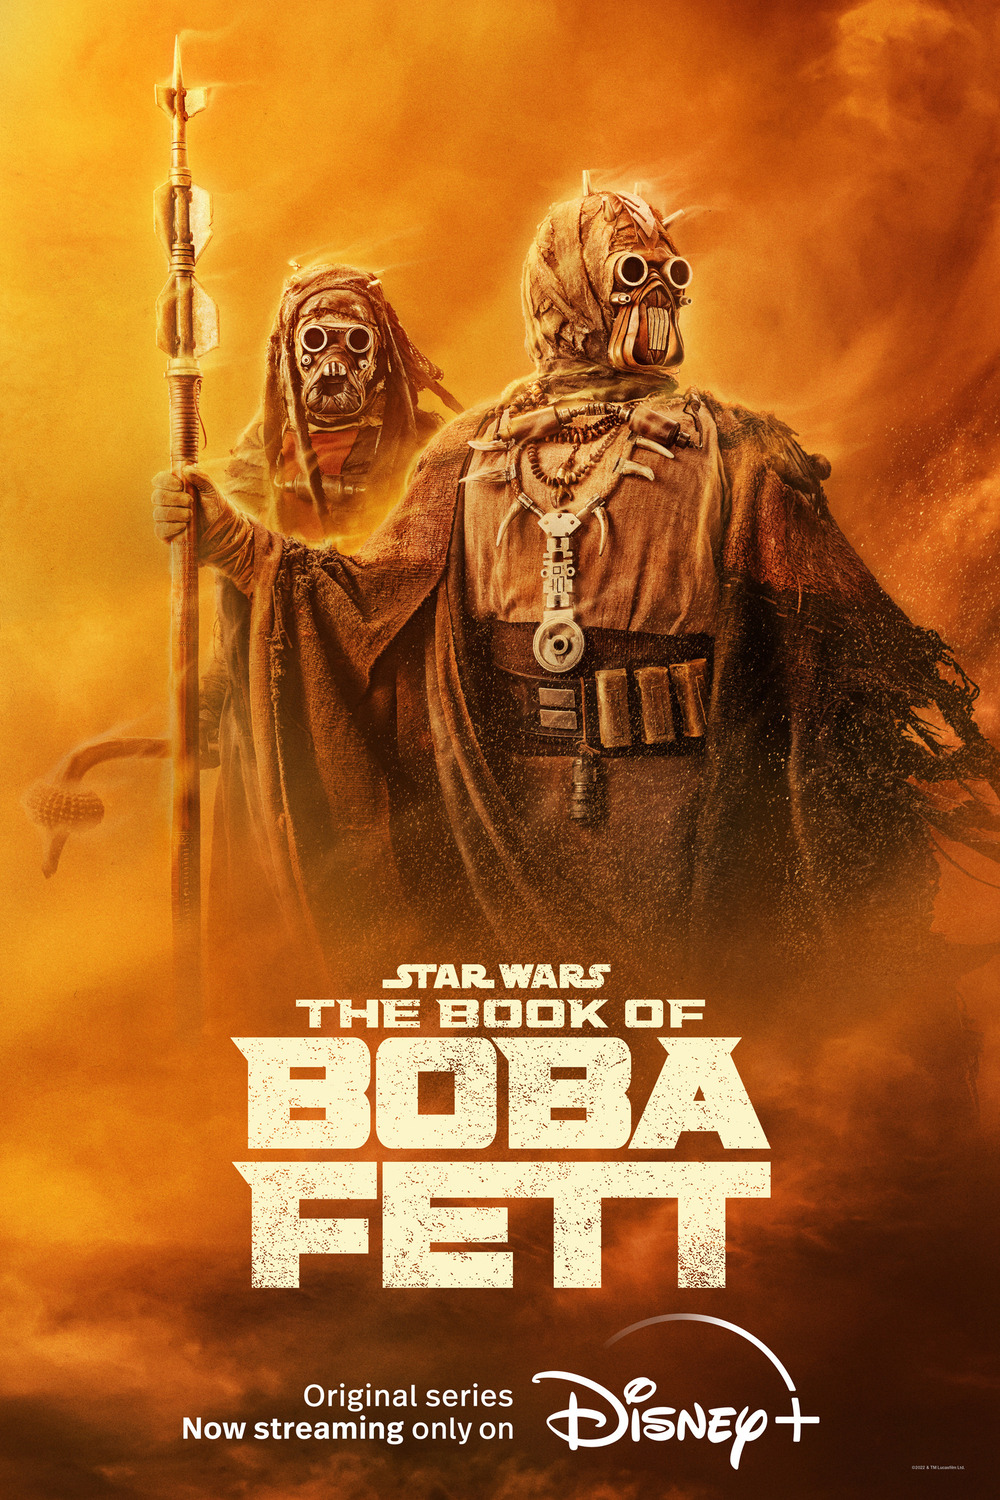 Watch The Book Of Boba Fett Season 1 Online In Hd Quality For Free On